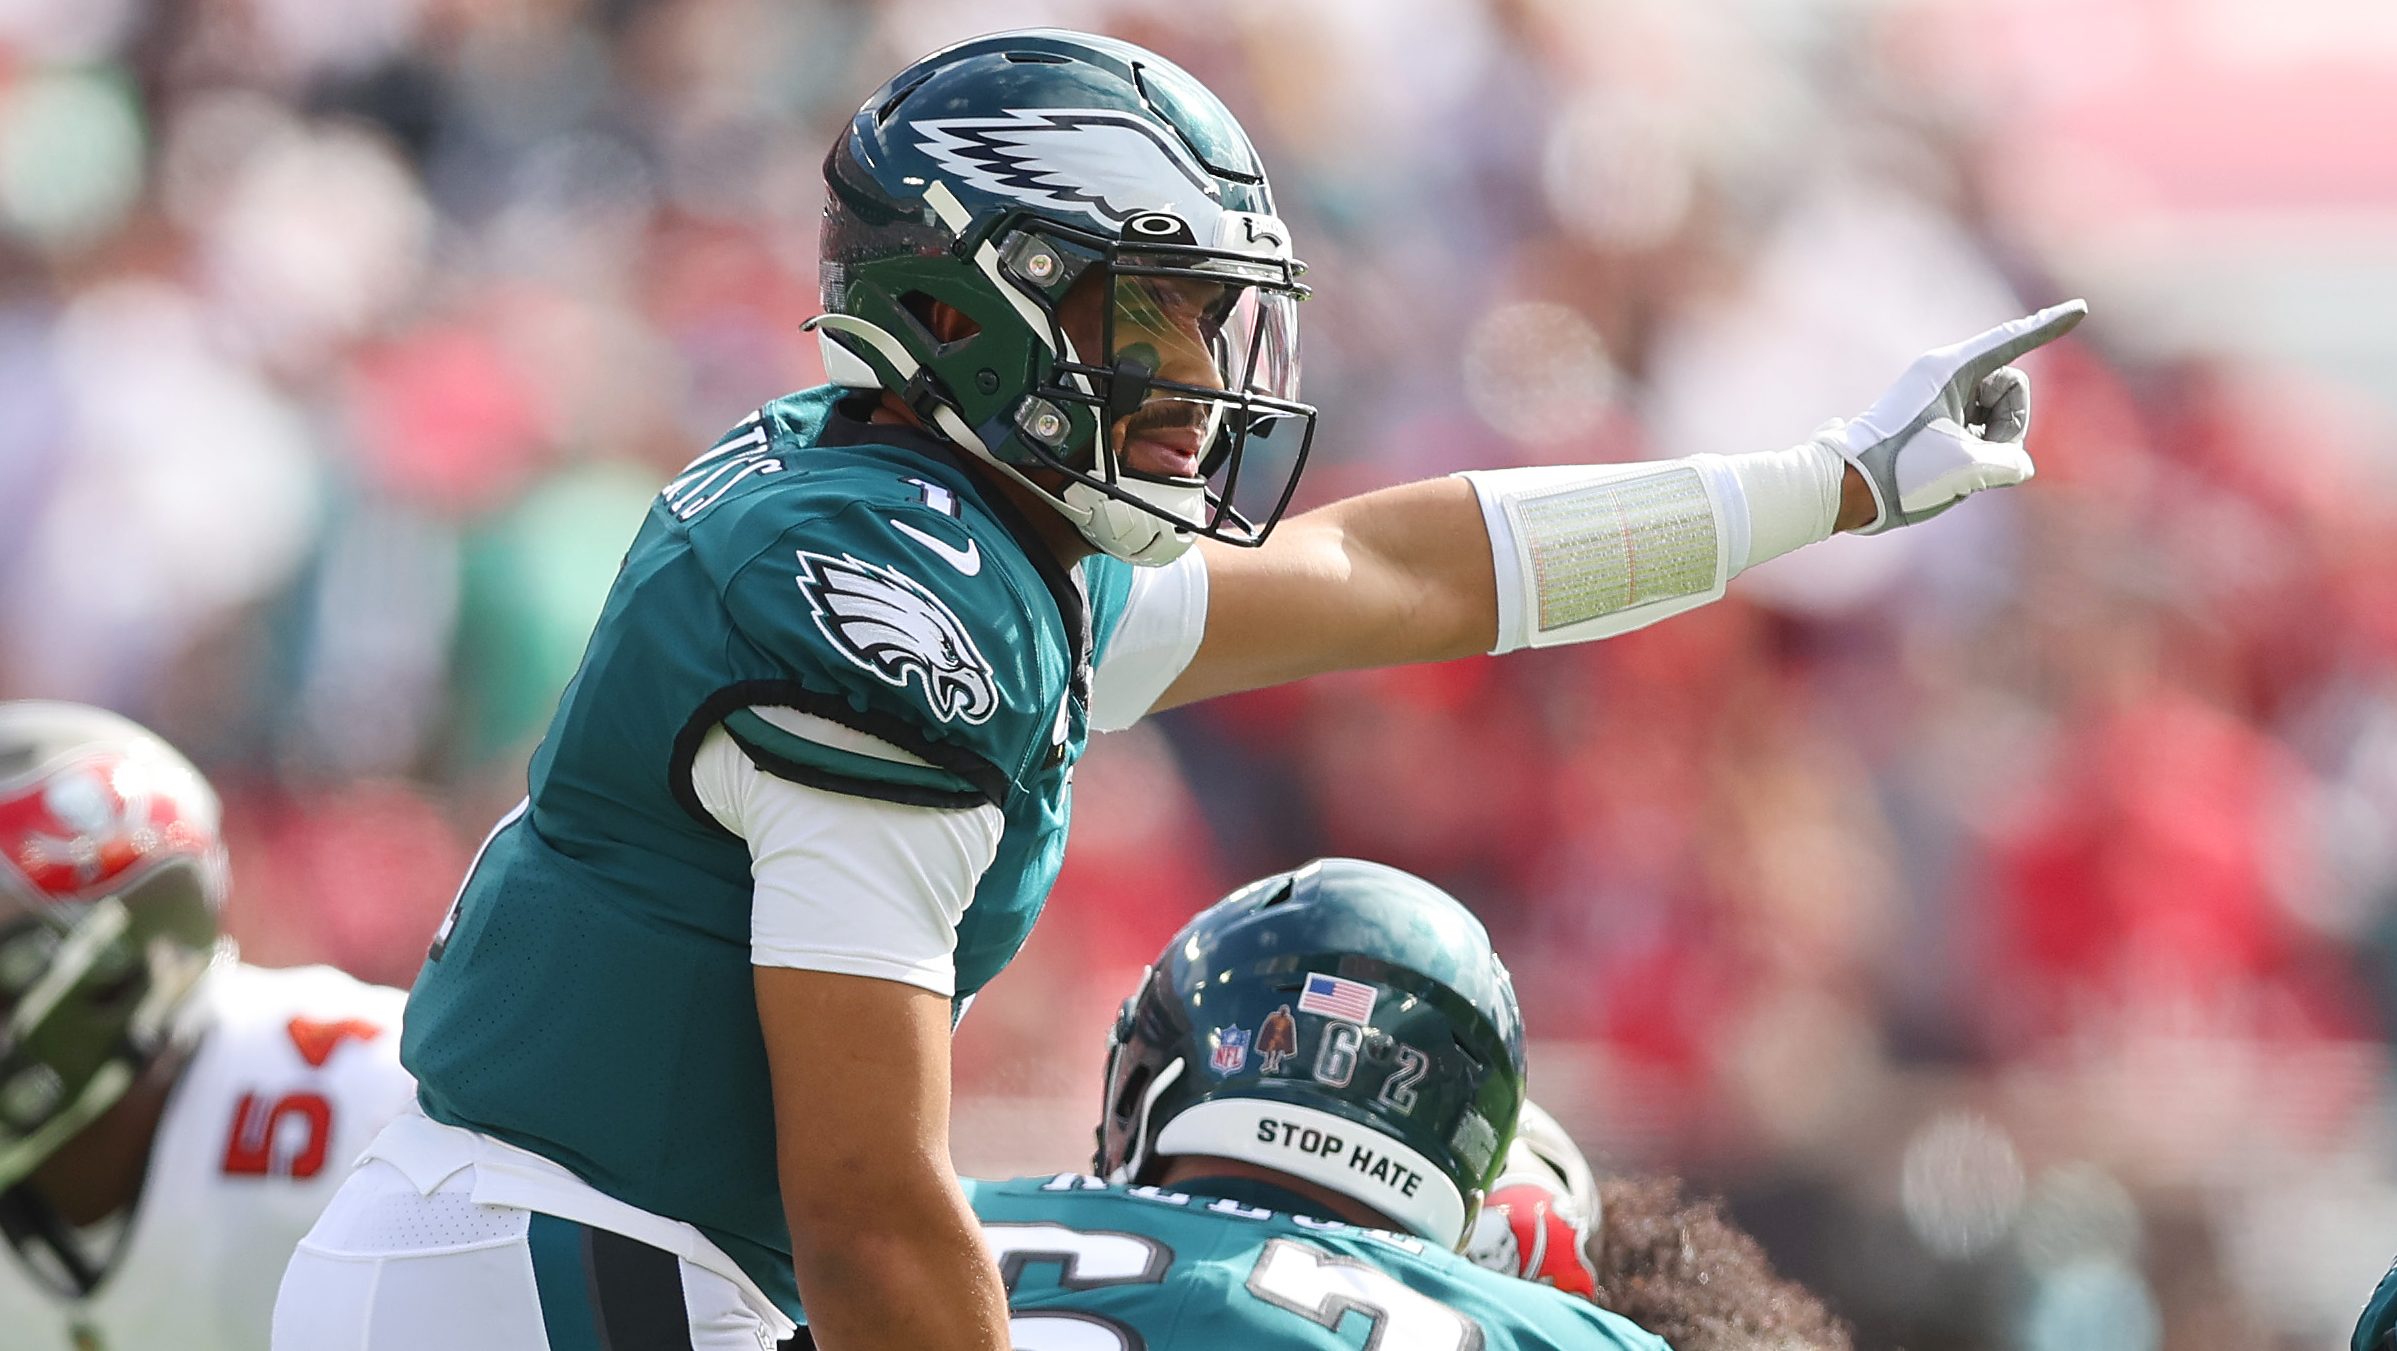 Eagles News: NFL insider discusses Jalen Hurts contract extension outlook -  Bleeding Green Nation